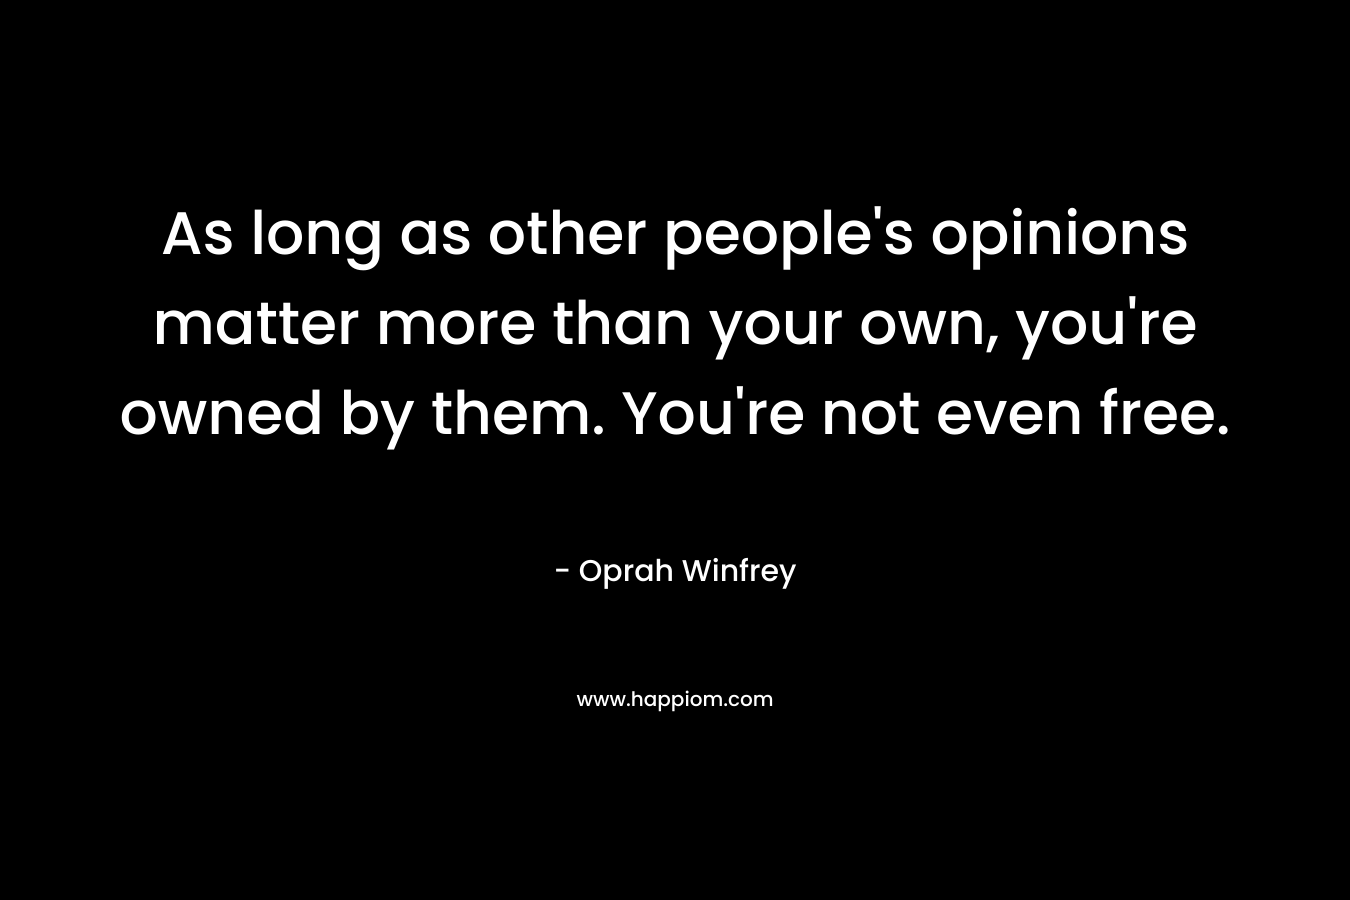 As long as other people’s opinions matter more than your own, you’re owned by them. You’re not even free. – Oprah Winfrey